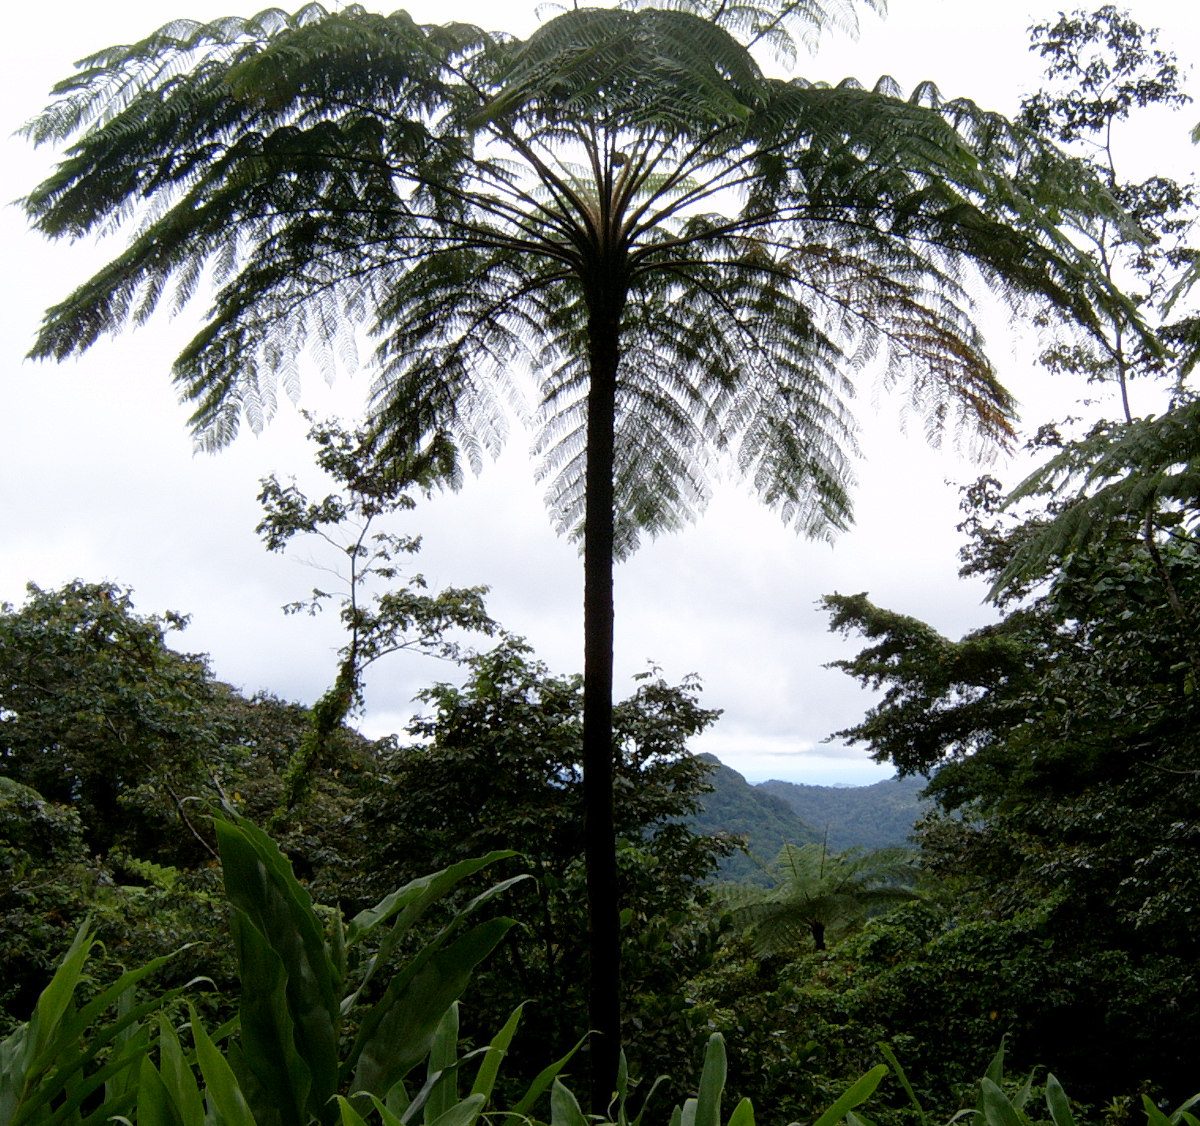 A palm tree on the Edmund forest reserve trail.